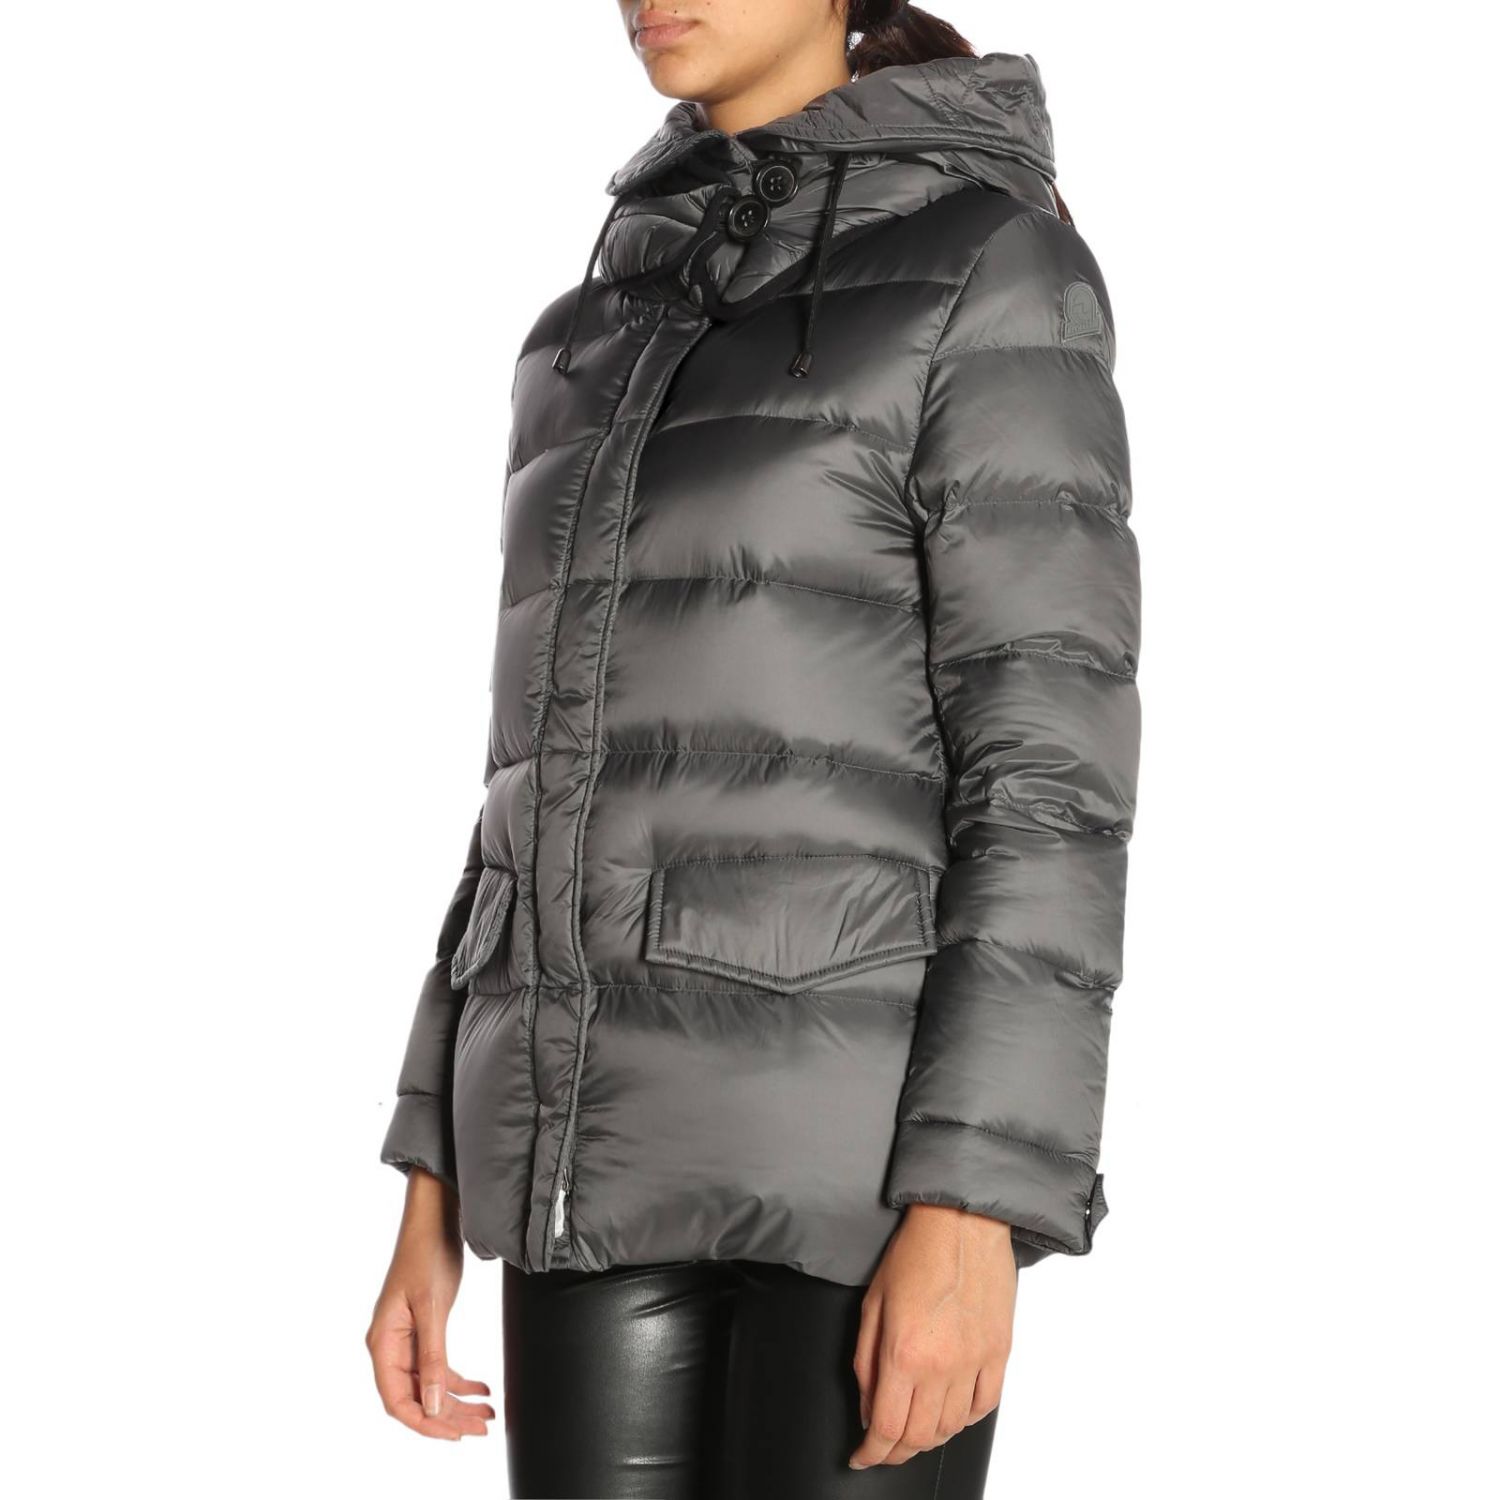 Invicta Outlet: Jacket women - Grey | Jacket Invicta 4440153/D GIGLIO.COM